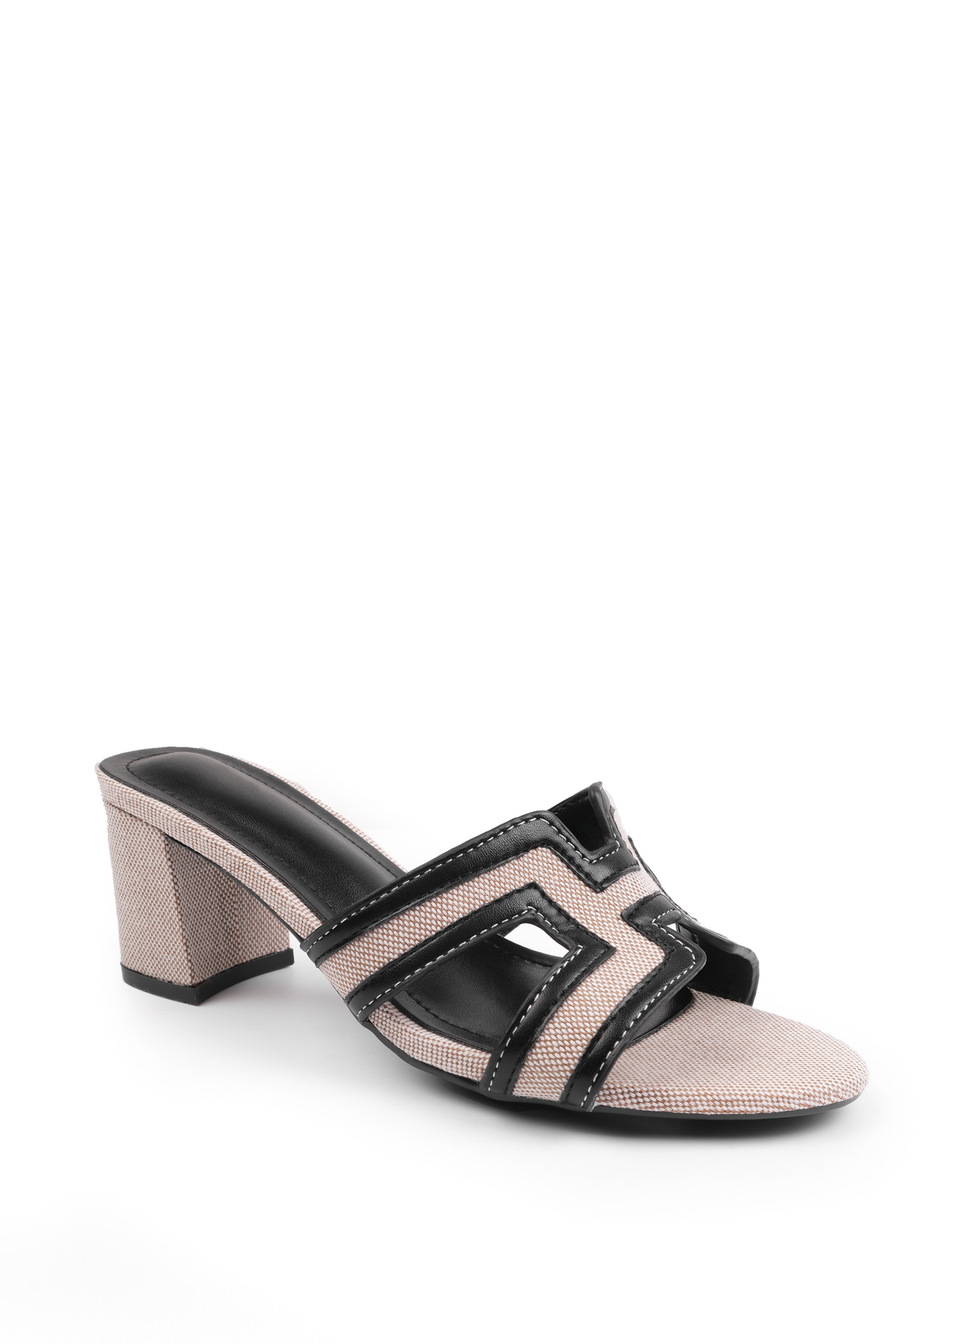 Where's That From Black PU Drama Cut Out Strap Block Heel Sandals